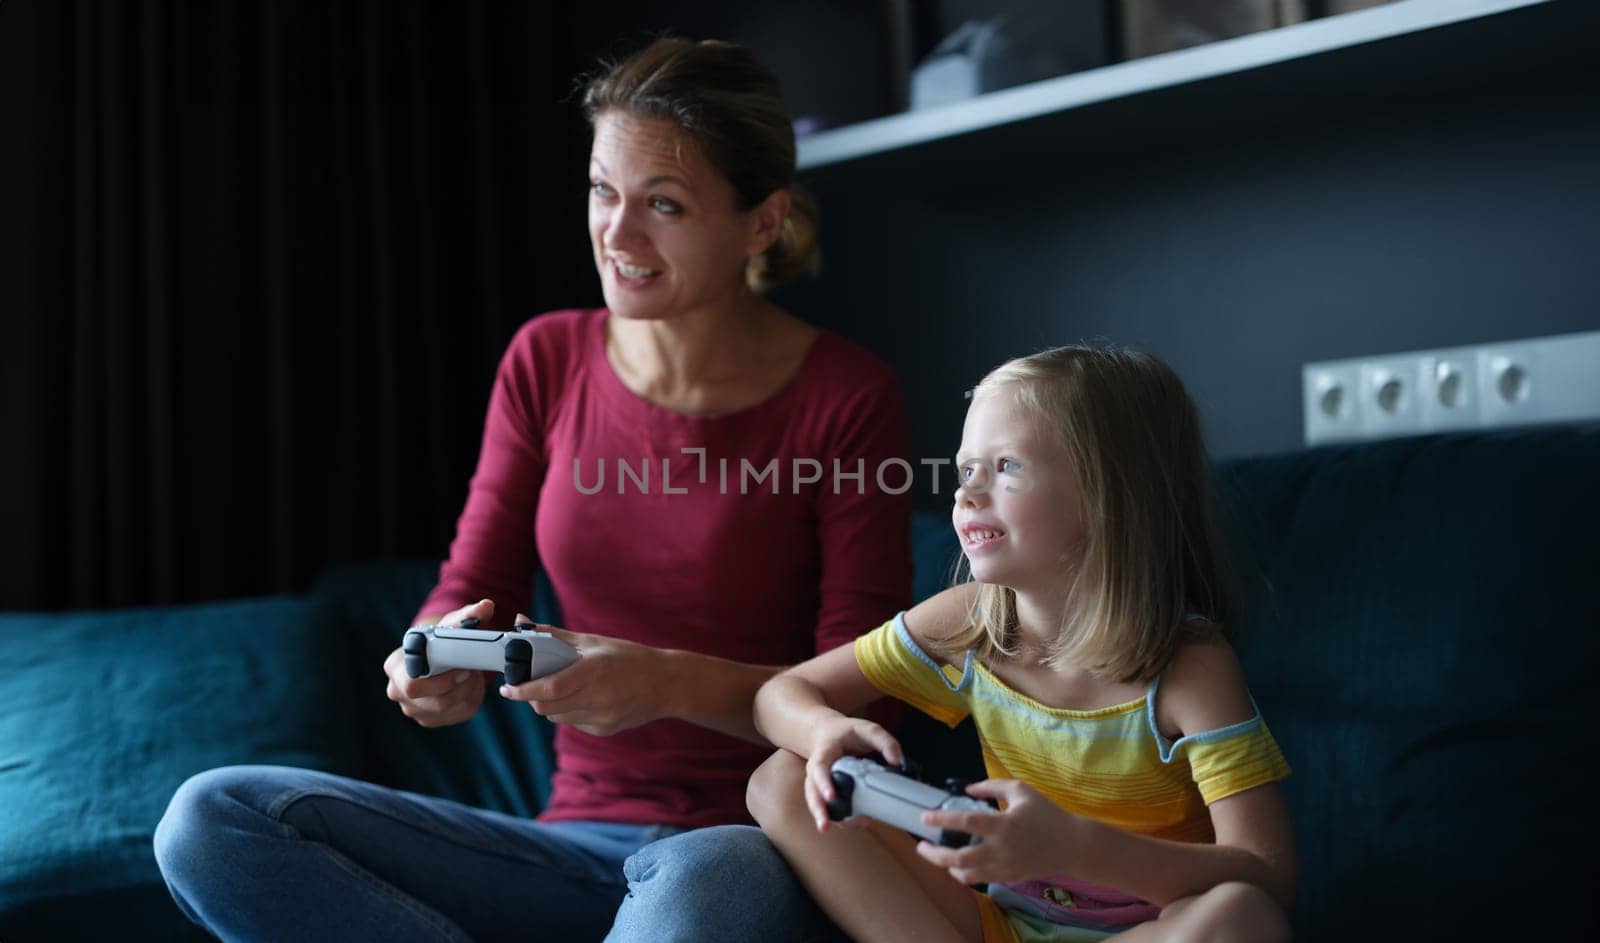 Mom and daughter hold game joysticks and play online games. Family games in game console concept